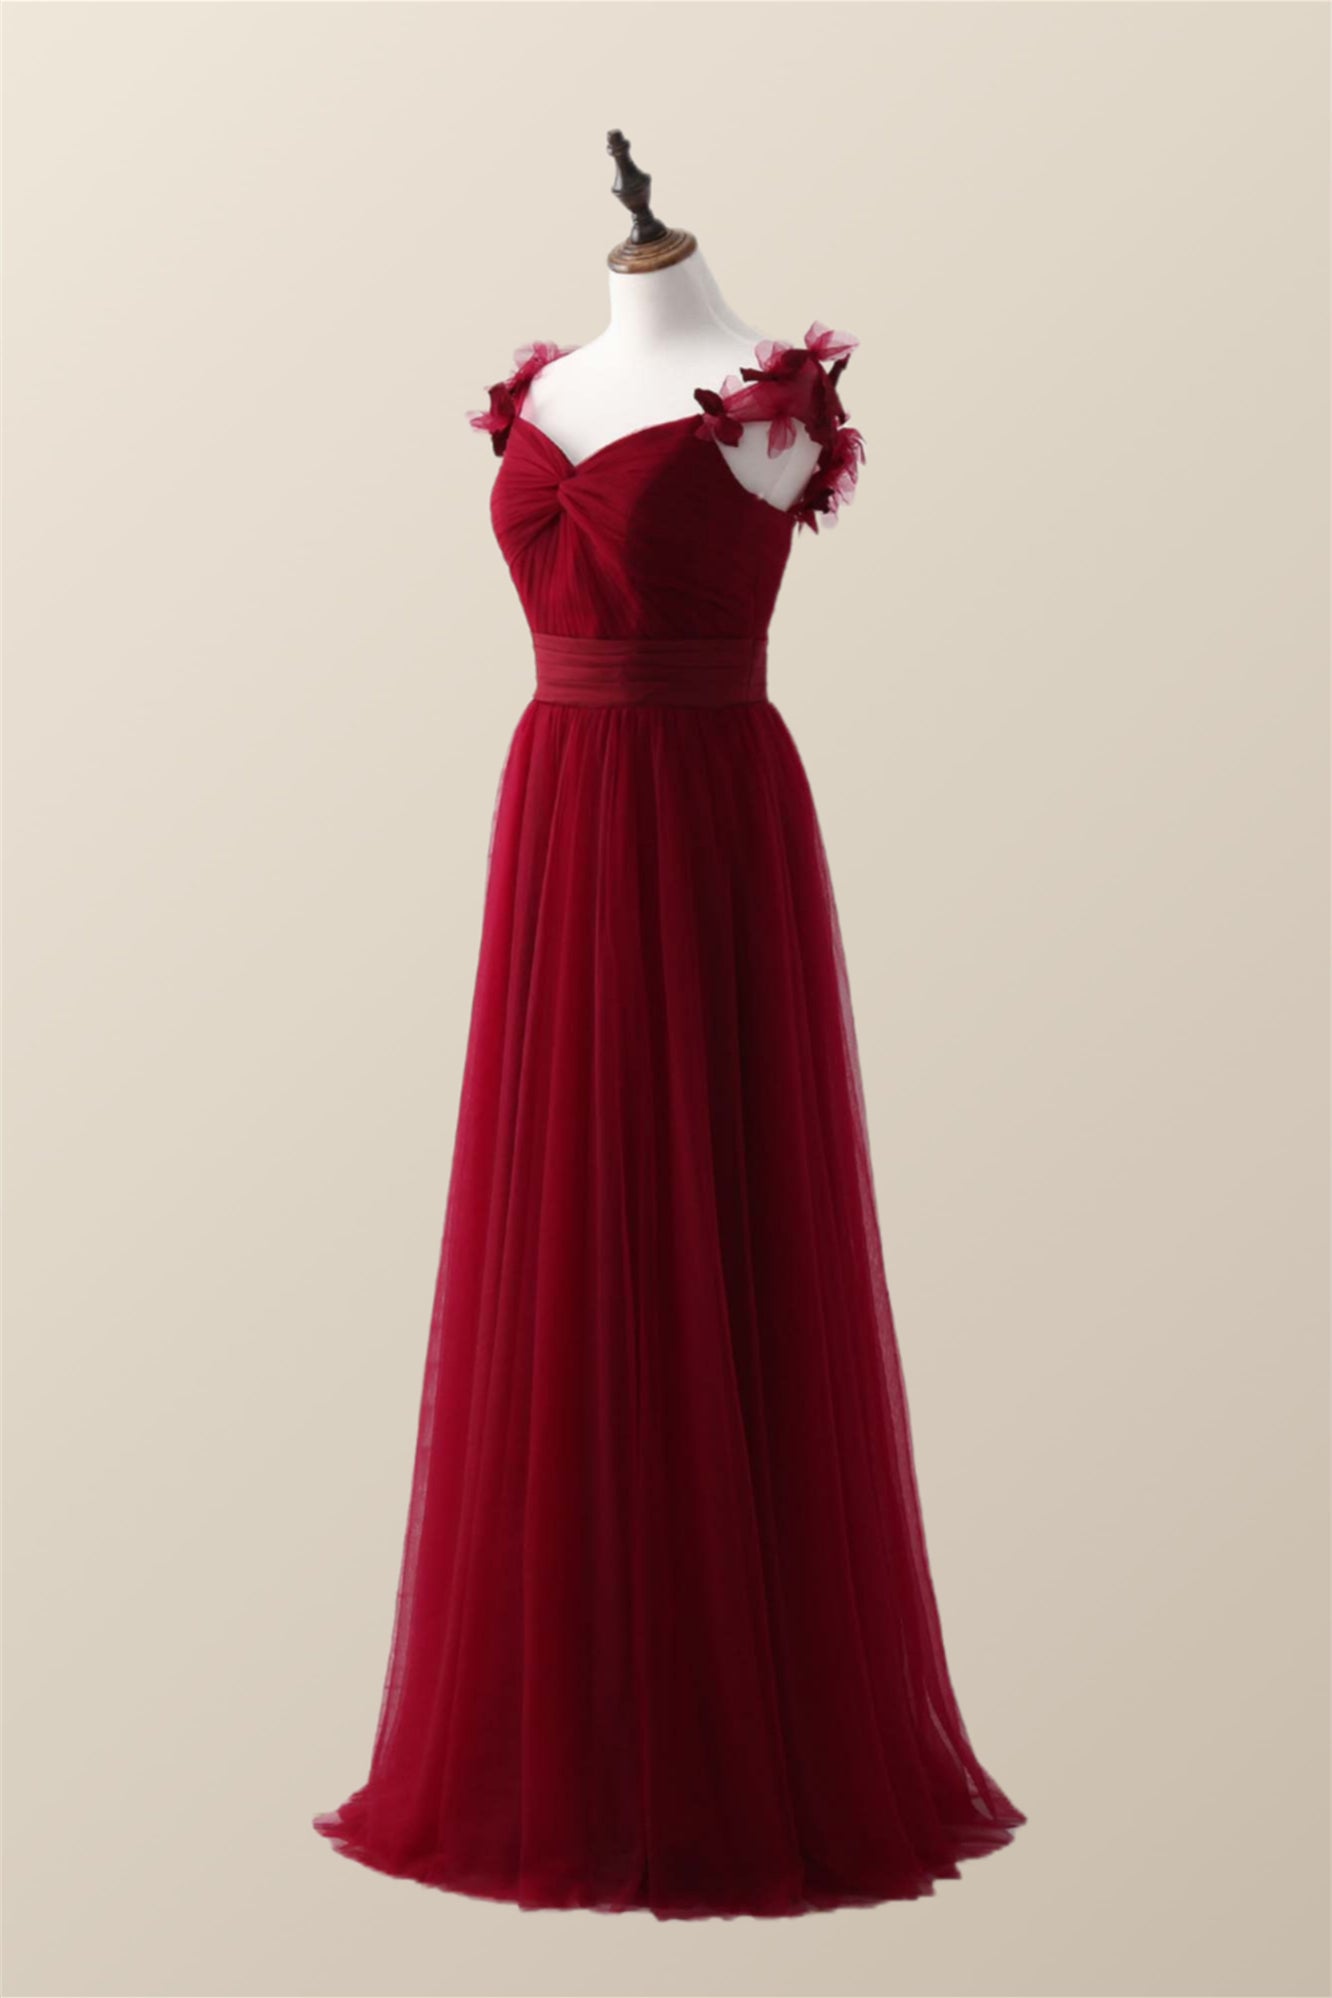 Knotted Front Red Tulle A-line Long Bridesmaid Dress